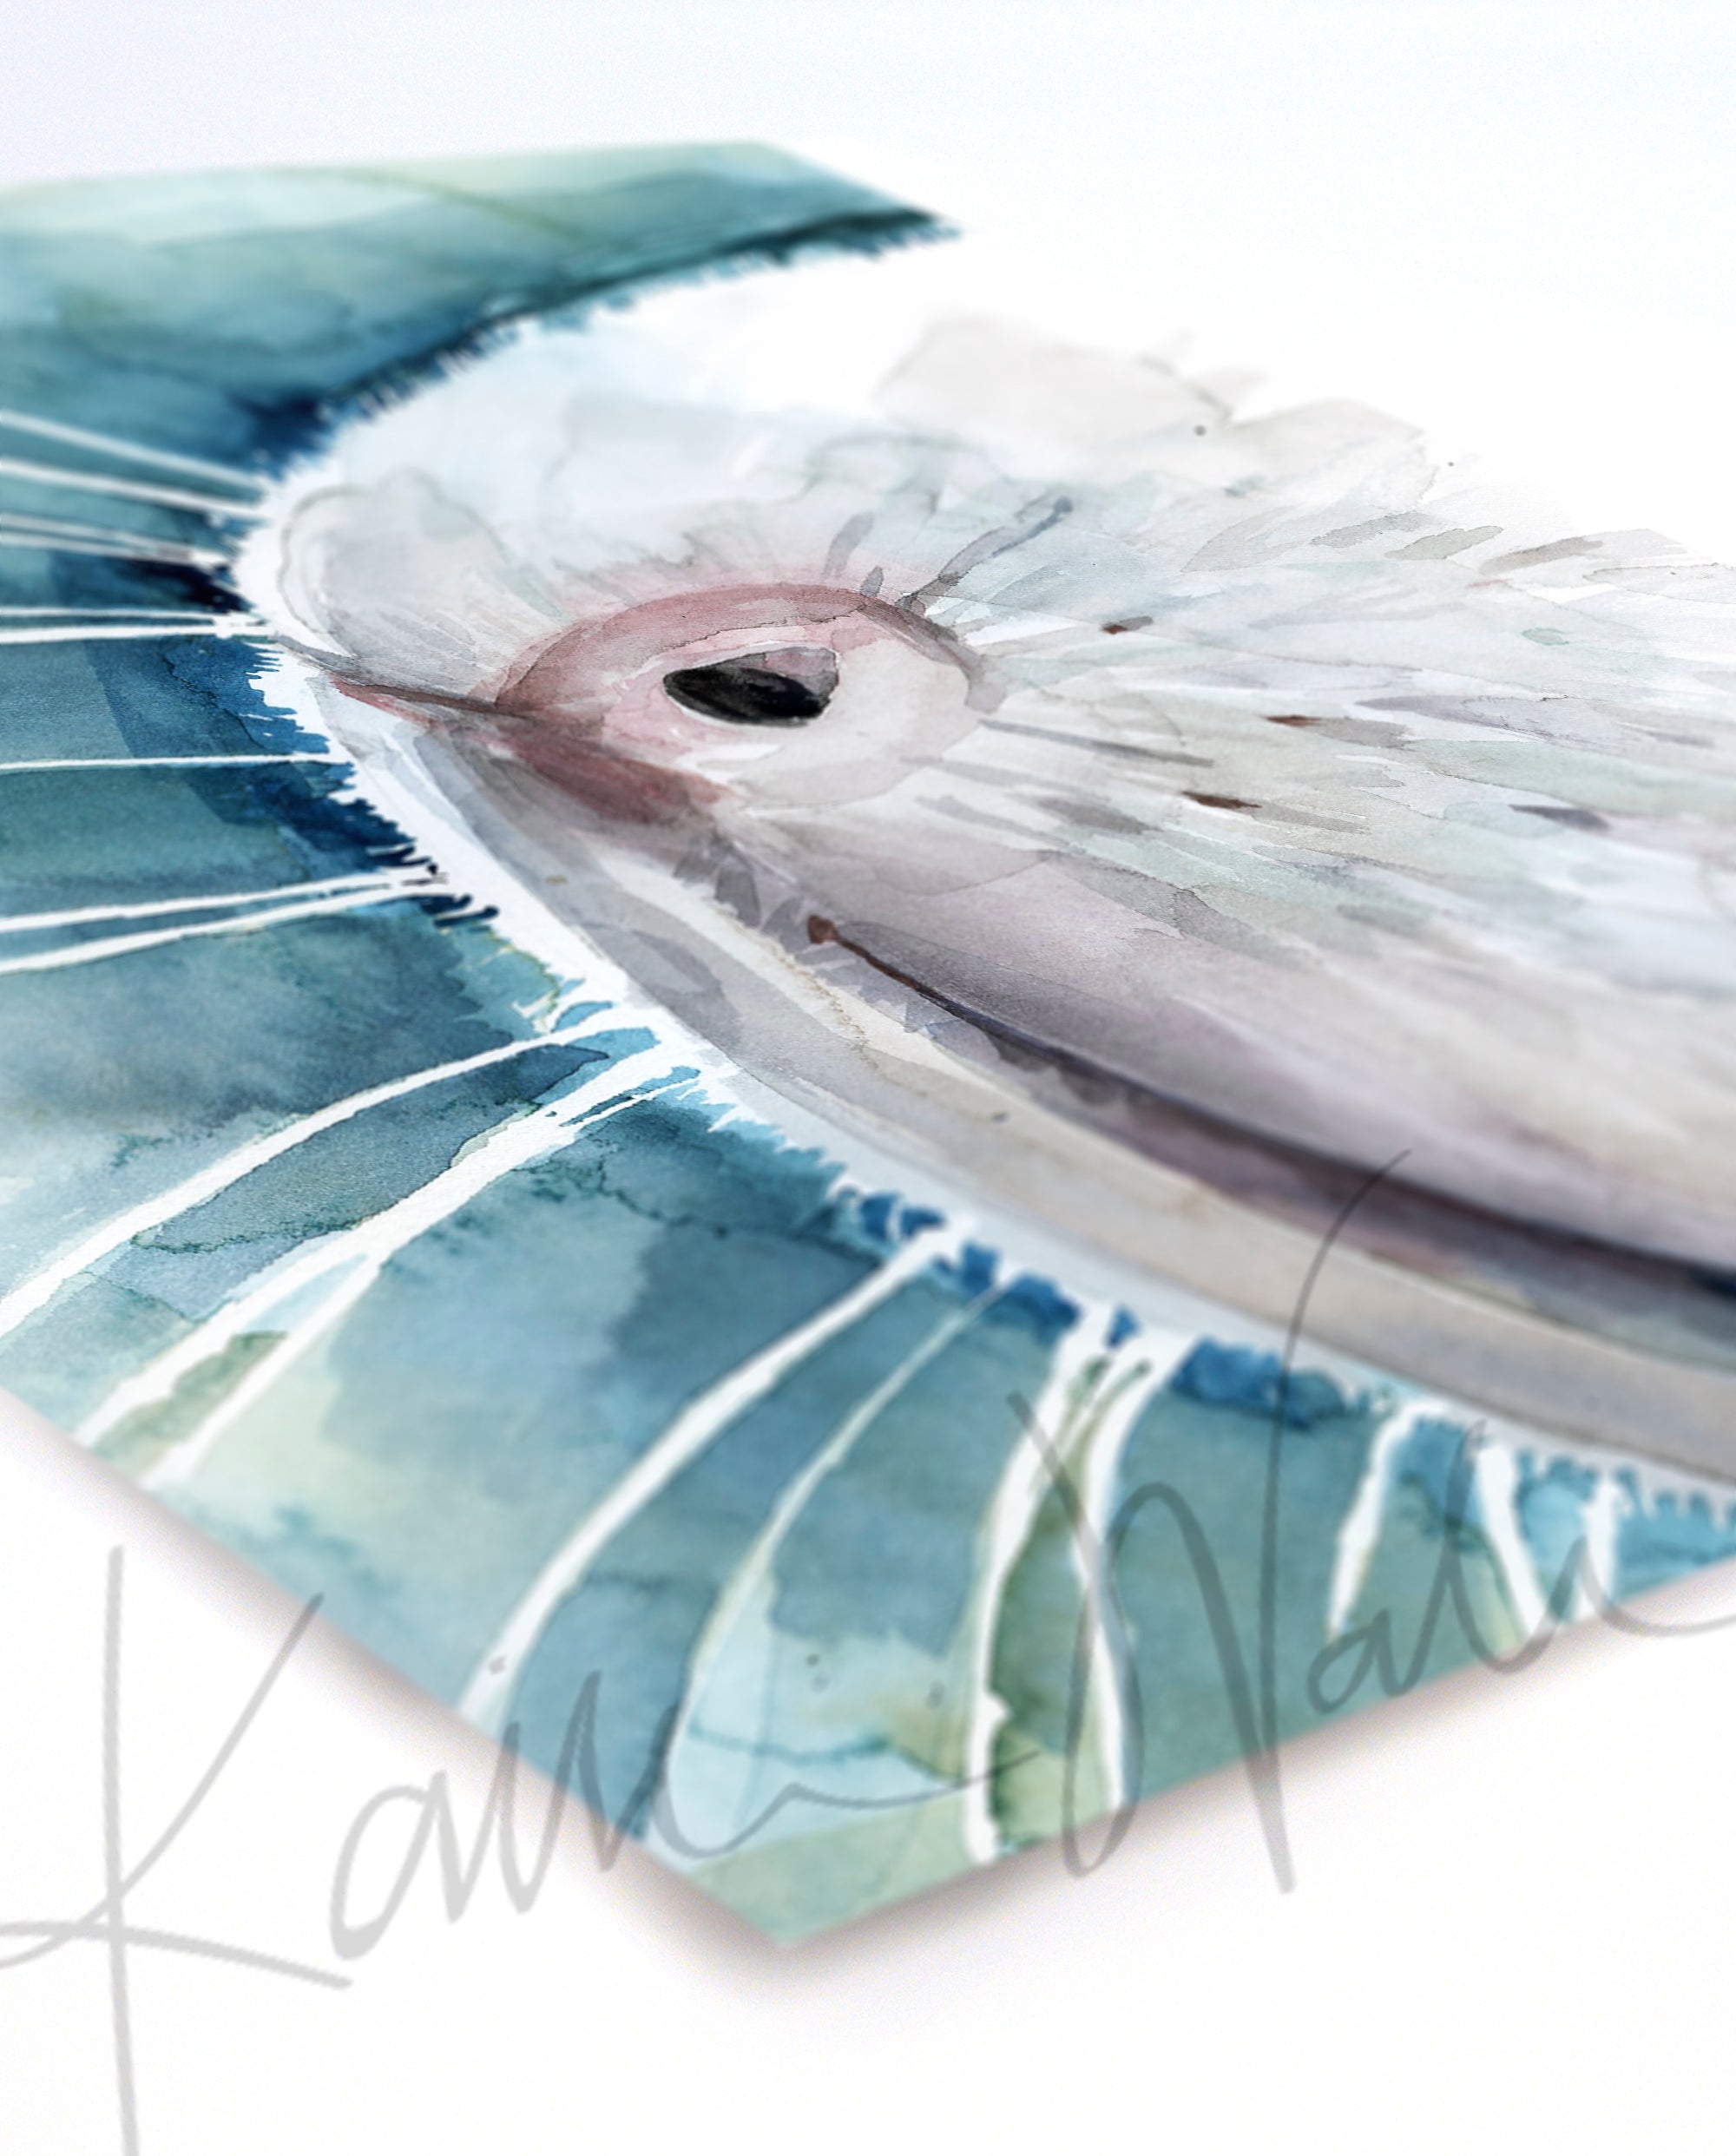 Unframed watercolor painting of a zoomed in perspective of a white guinea pig’s nose on a teal, blue, and green background. The print is at an angle.